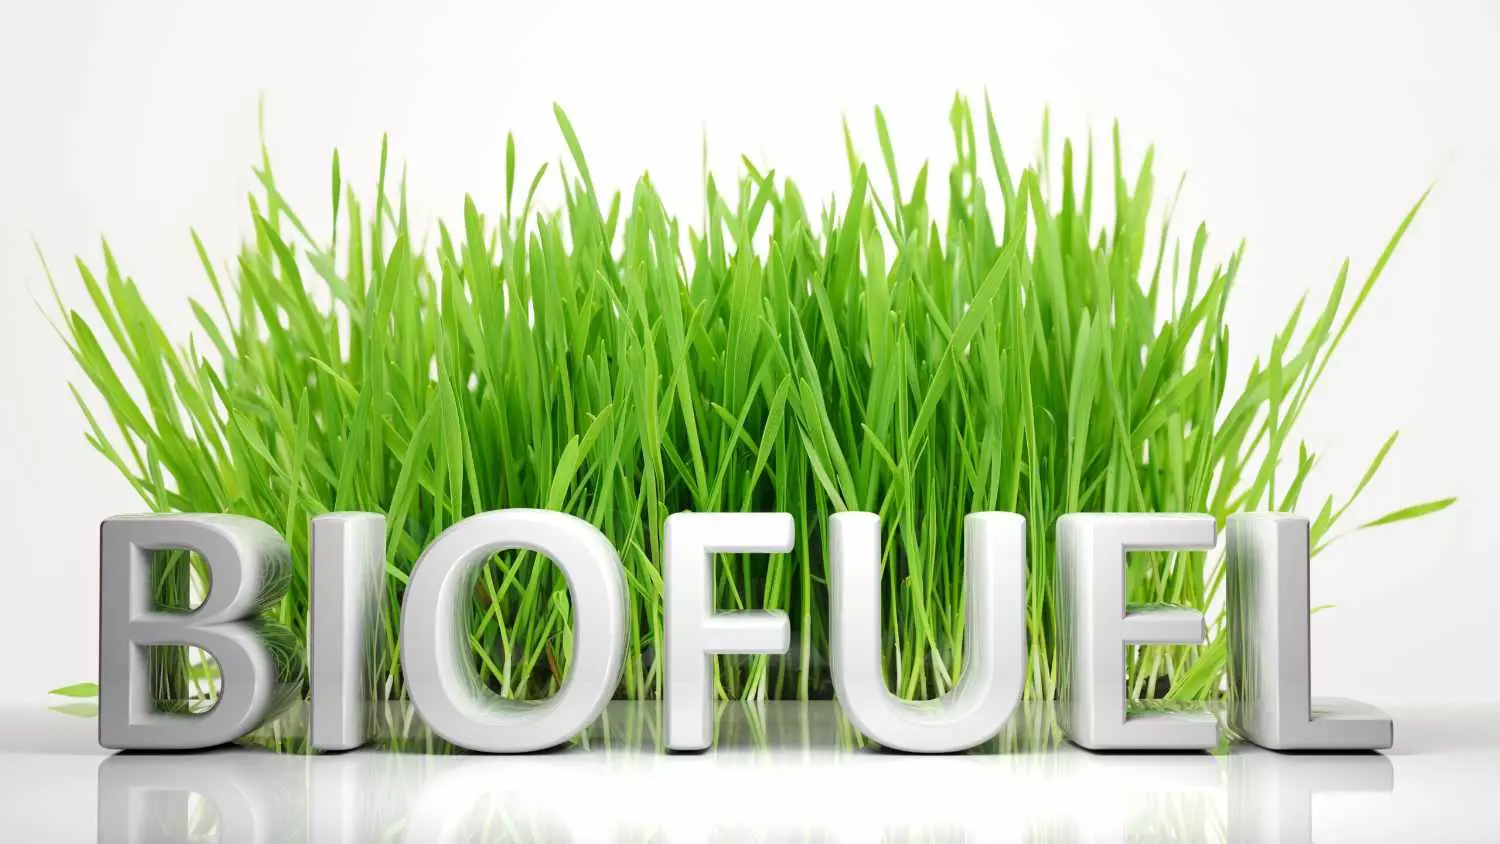 Green grass with biofuel